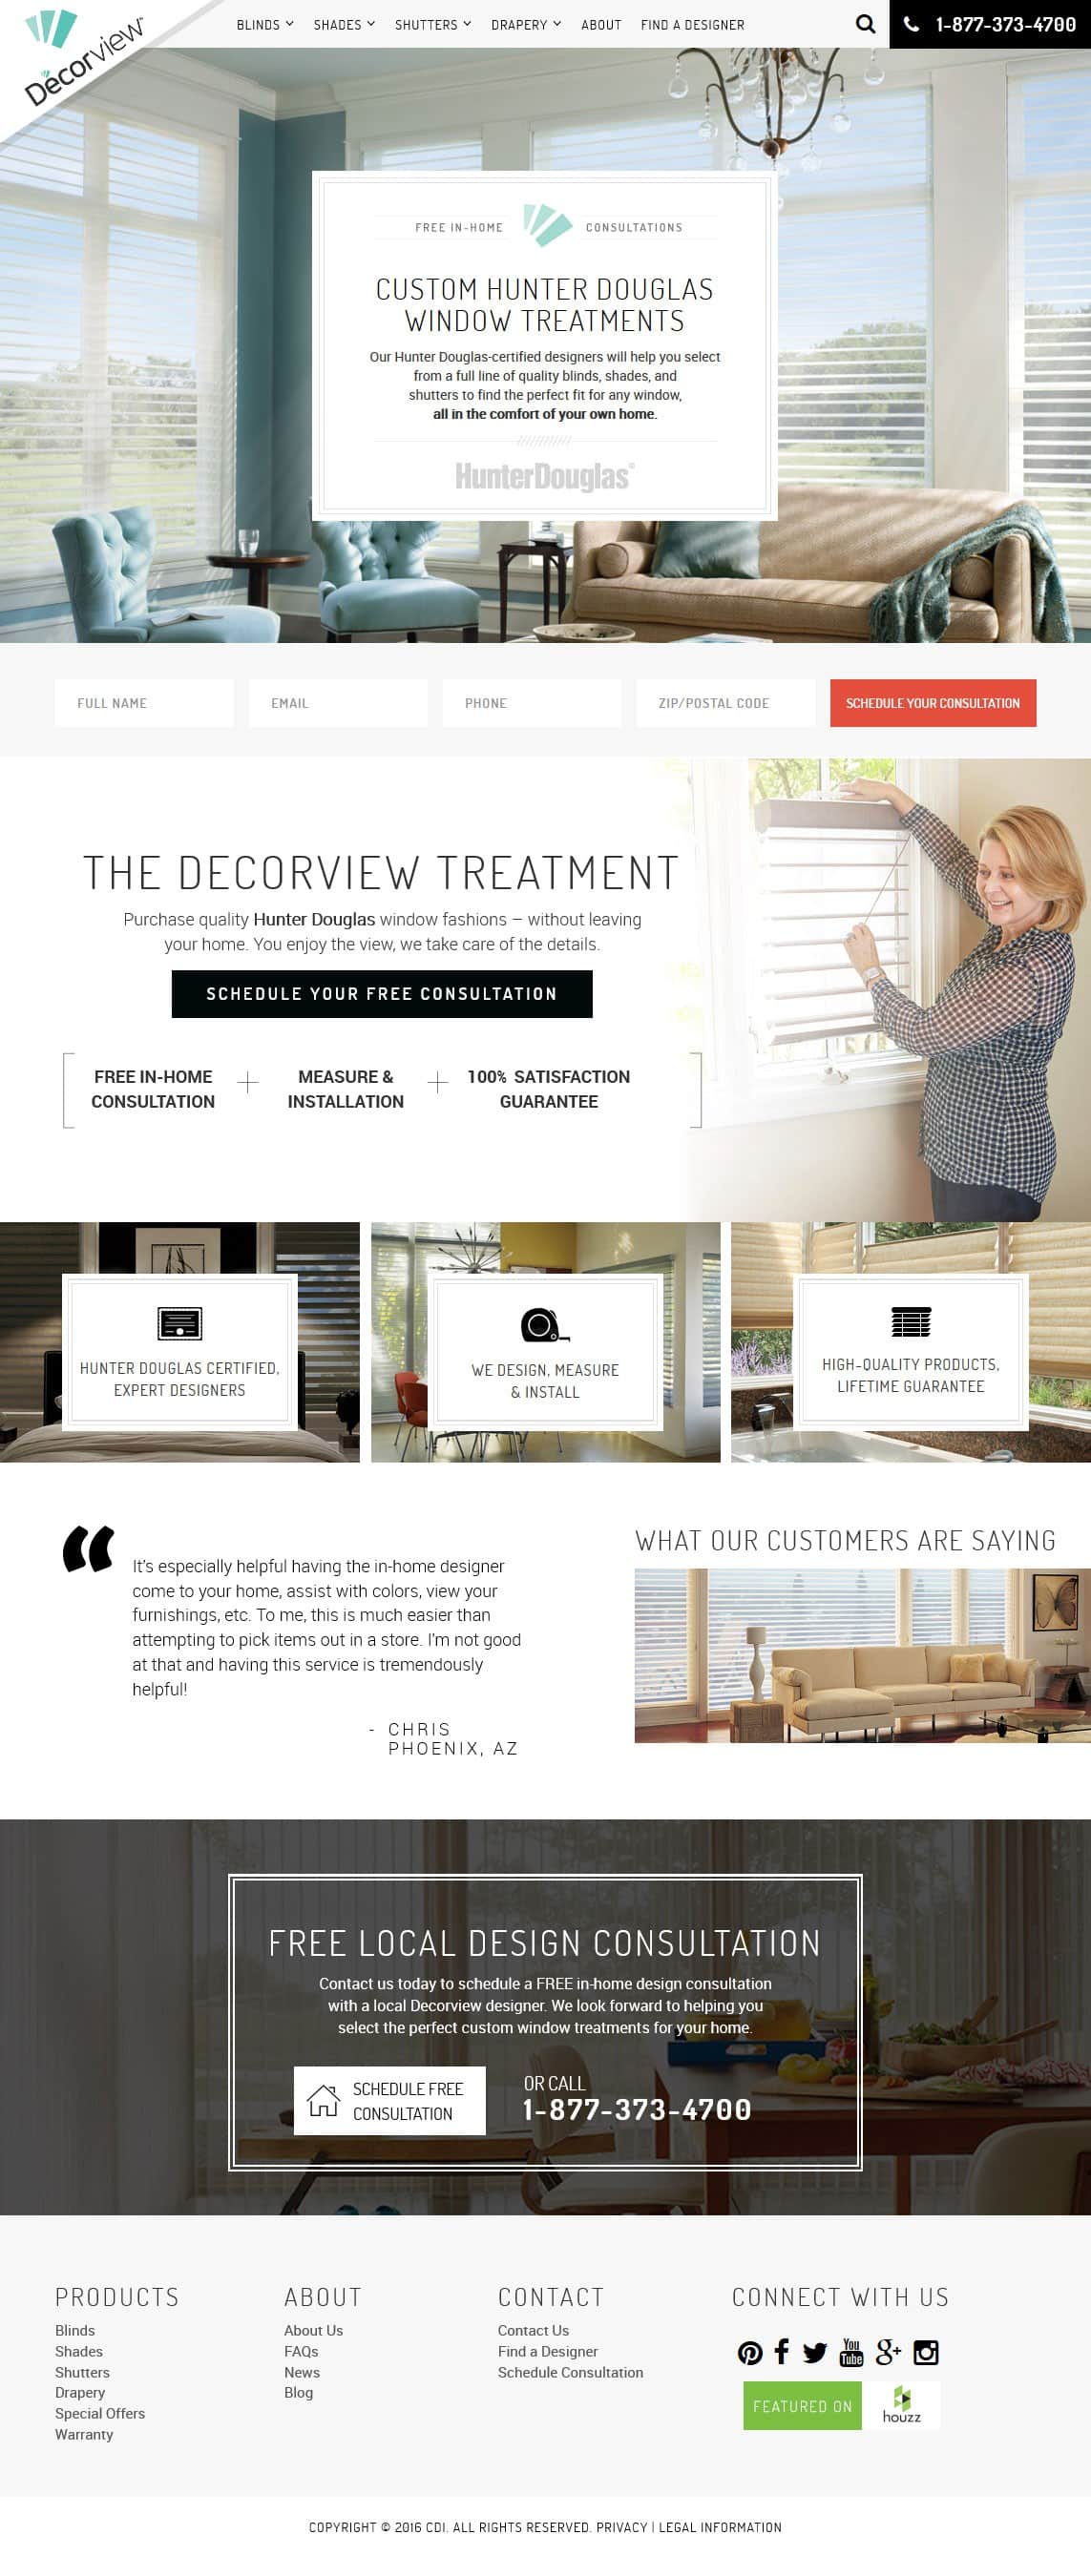 Tablet view of decorview website